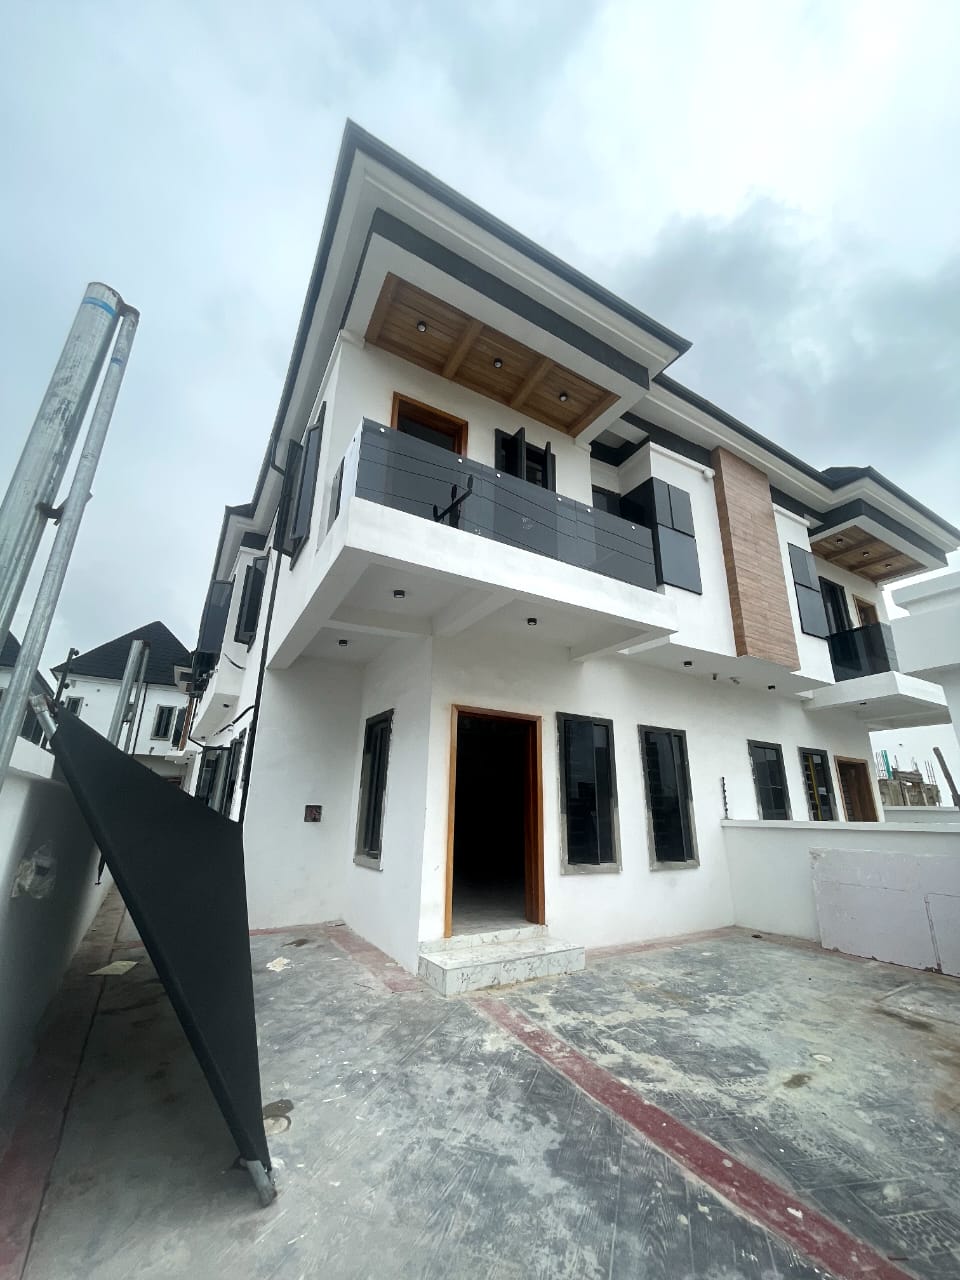 Welcome to Royal Pine Estate Orchid Road Lekki Lagos